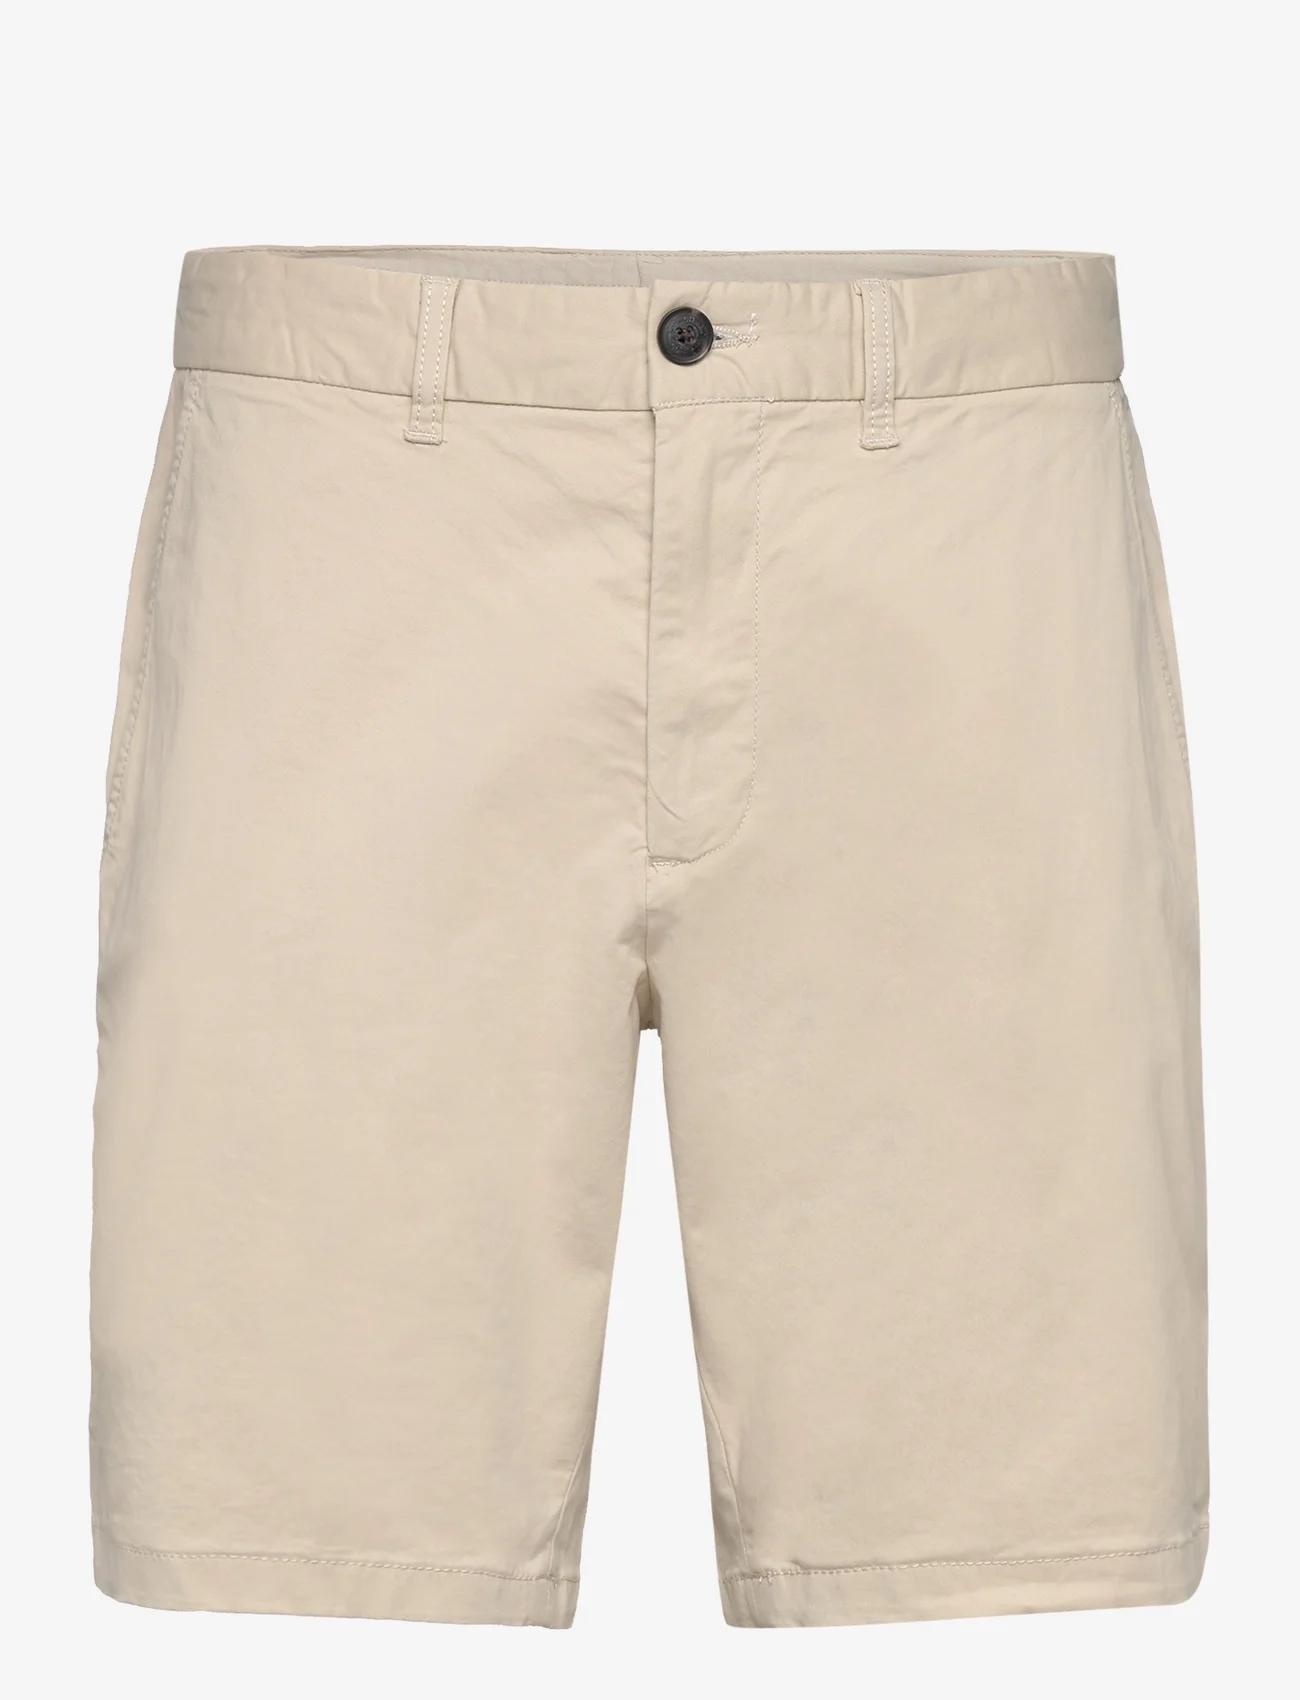 French Connection - STRTCH CHINO SHORTS - chinos shorts - stone - 0